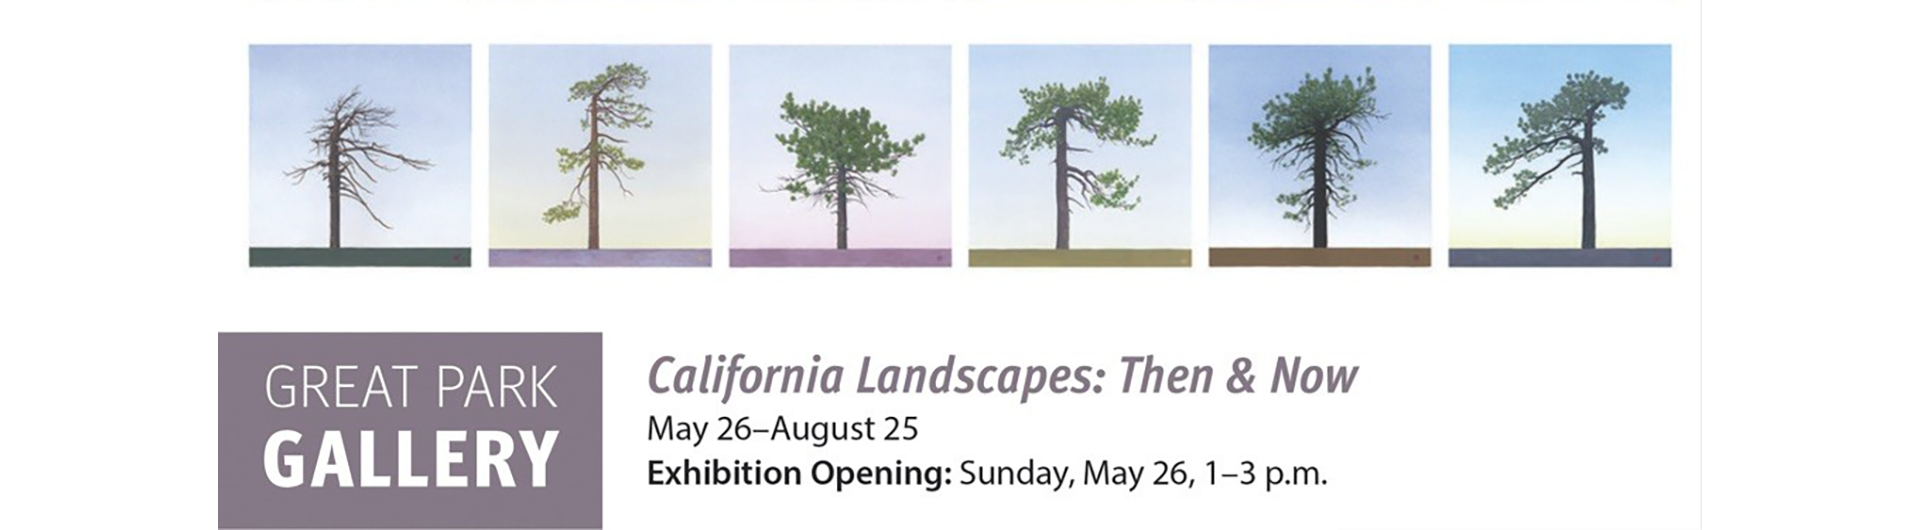 California Landscapes then and now banner